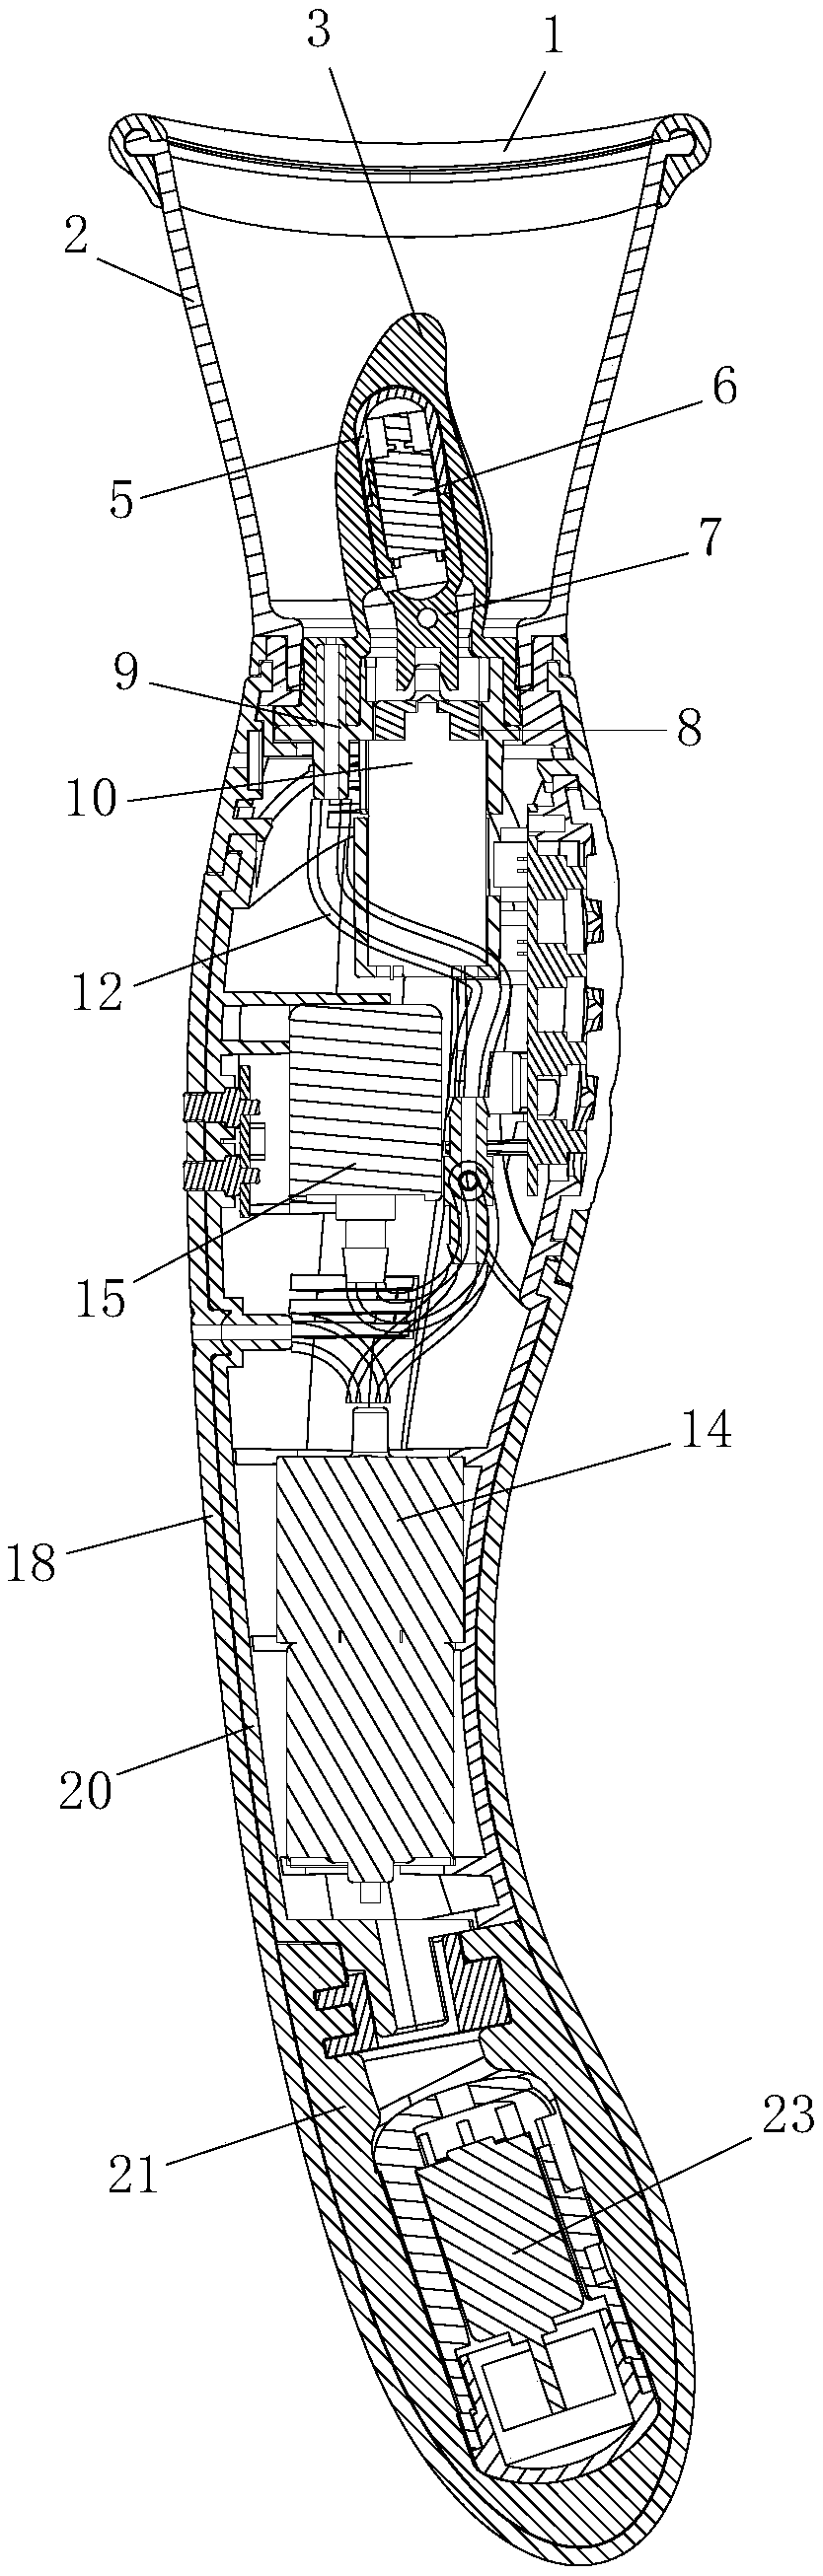 Double-end rod massaging device